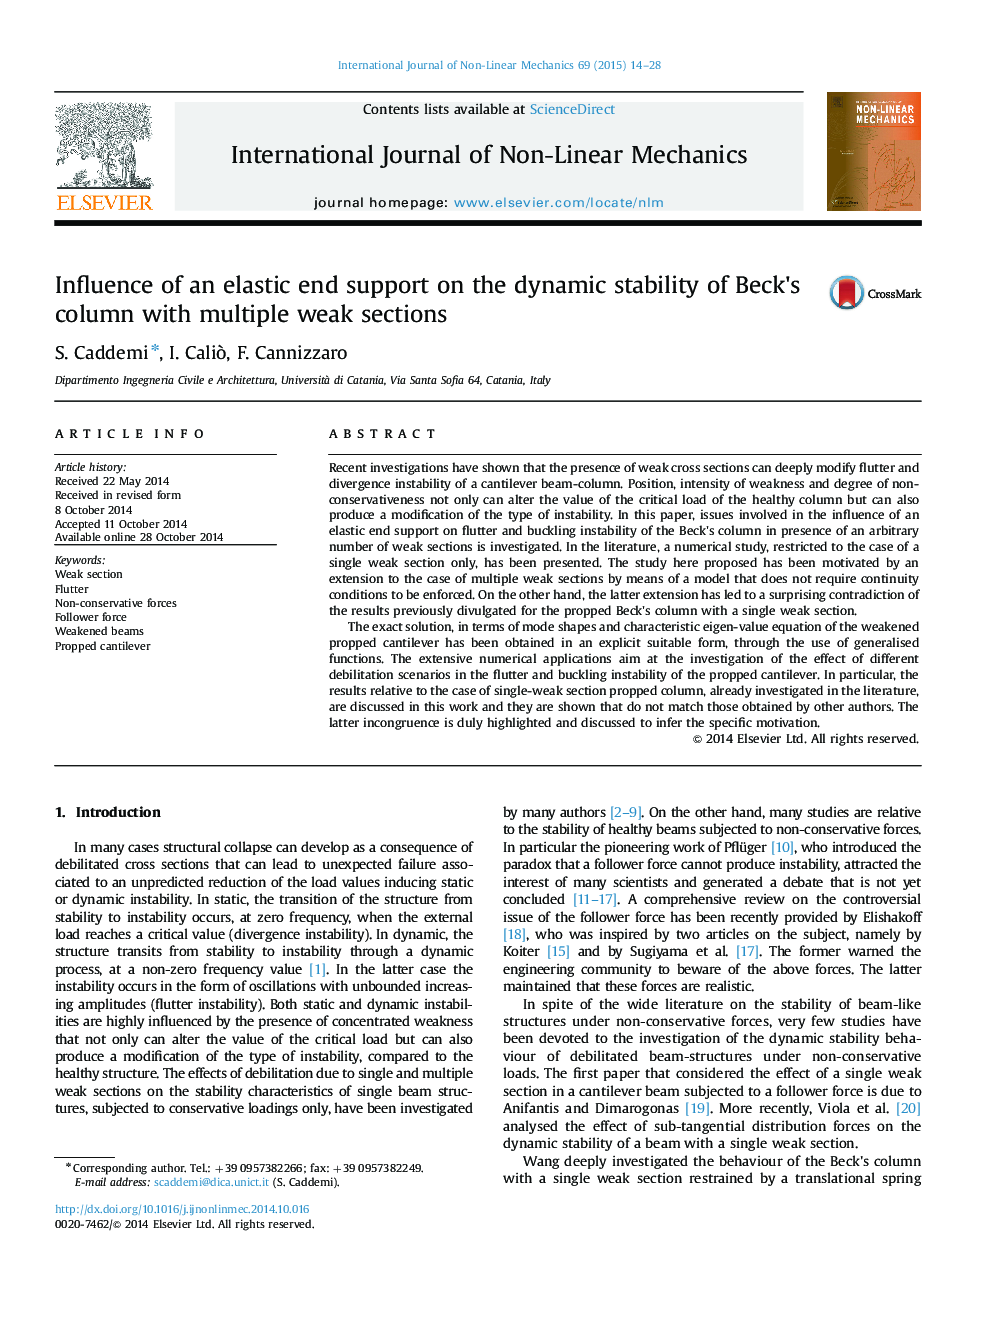 Influence of an elastic end support on the dynamic stability of Beck׳s column with multiple weak sections